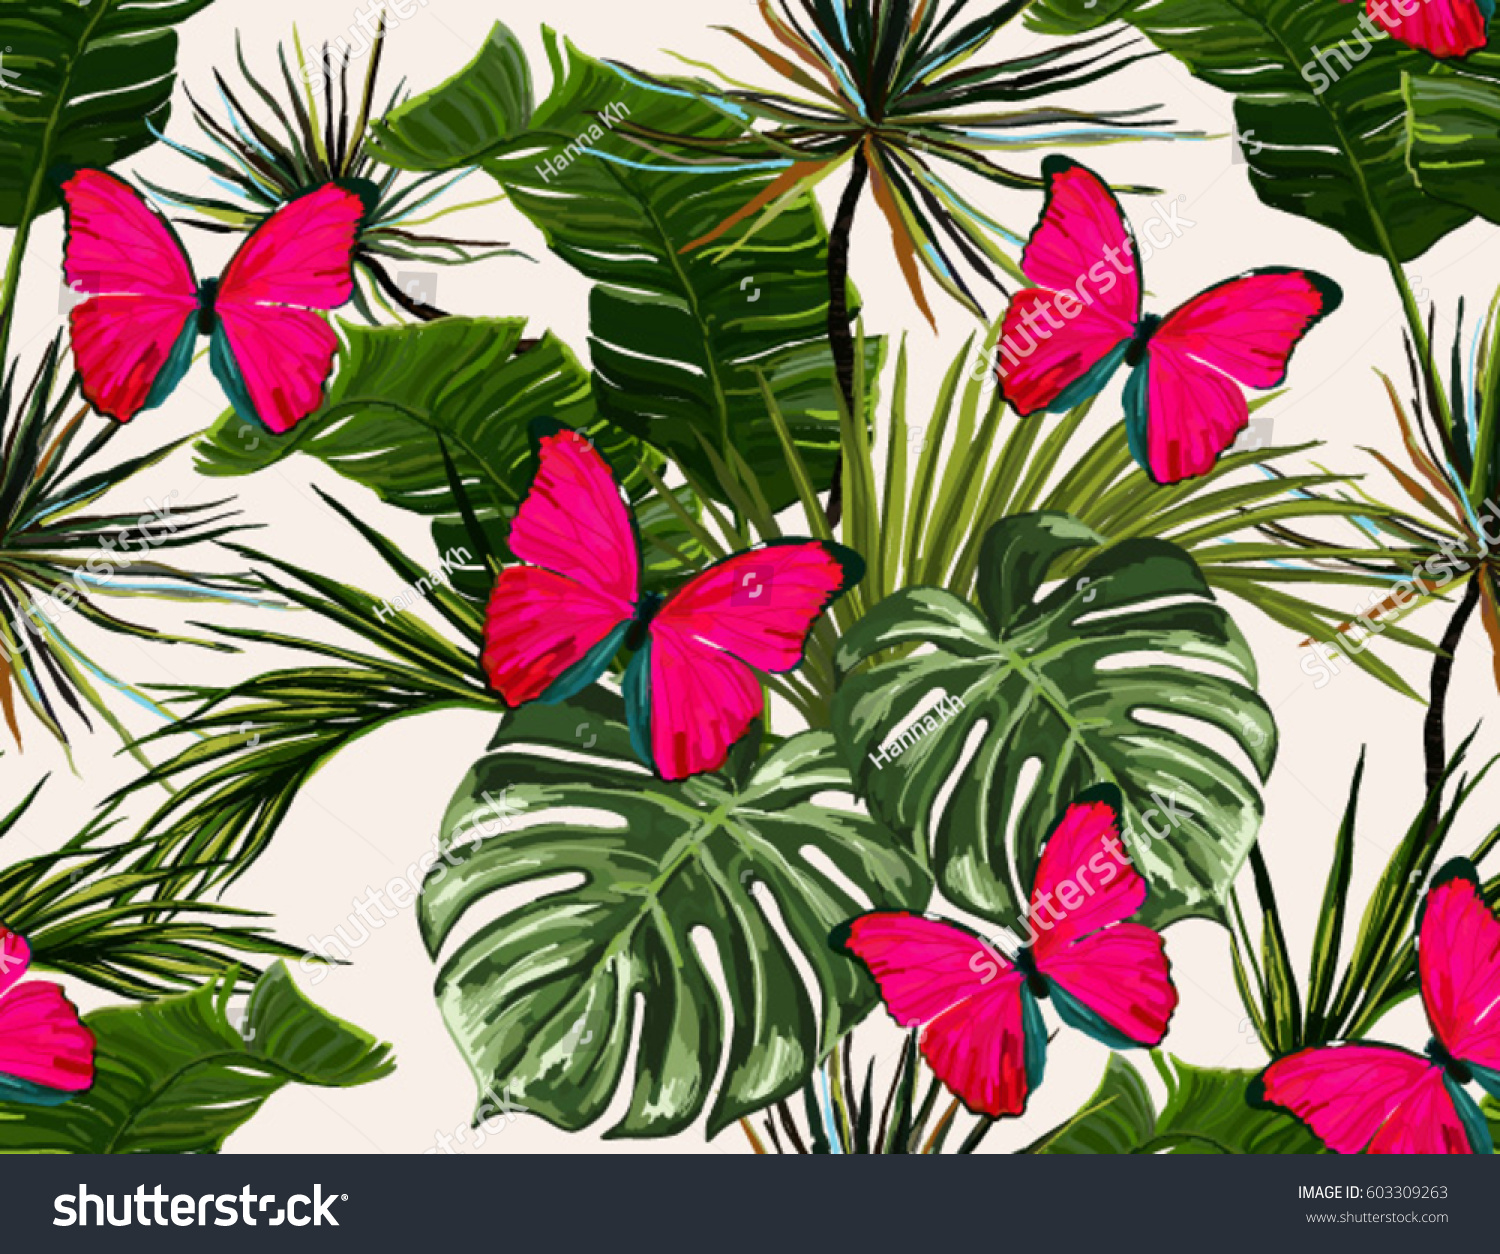 Beautiful Seamless Vector Floral Summer Pattern Stock Vector Royalty Free 603309263,How Much Would The Friends Apartment Cost